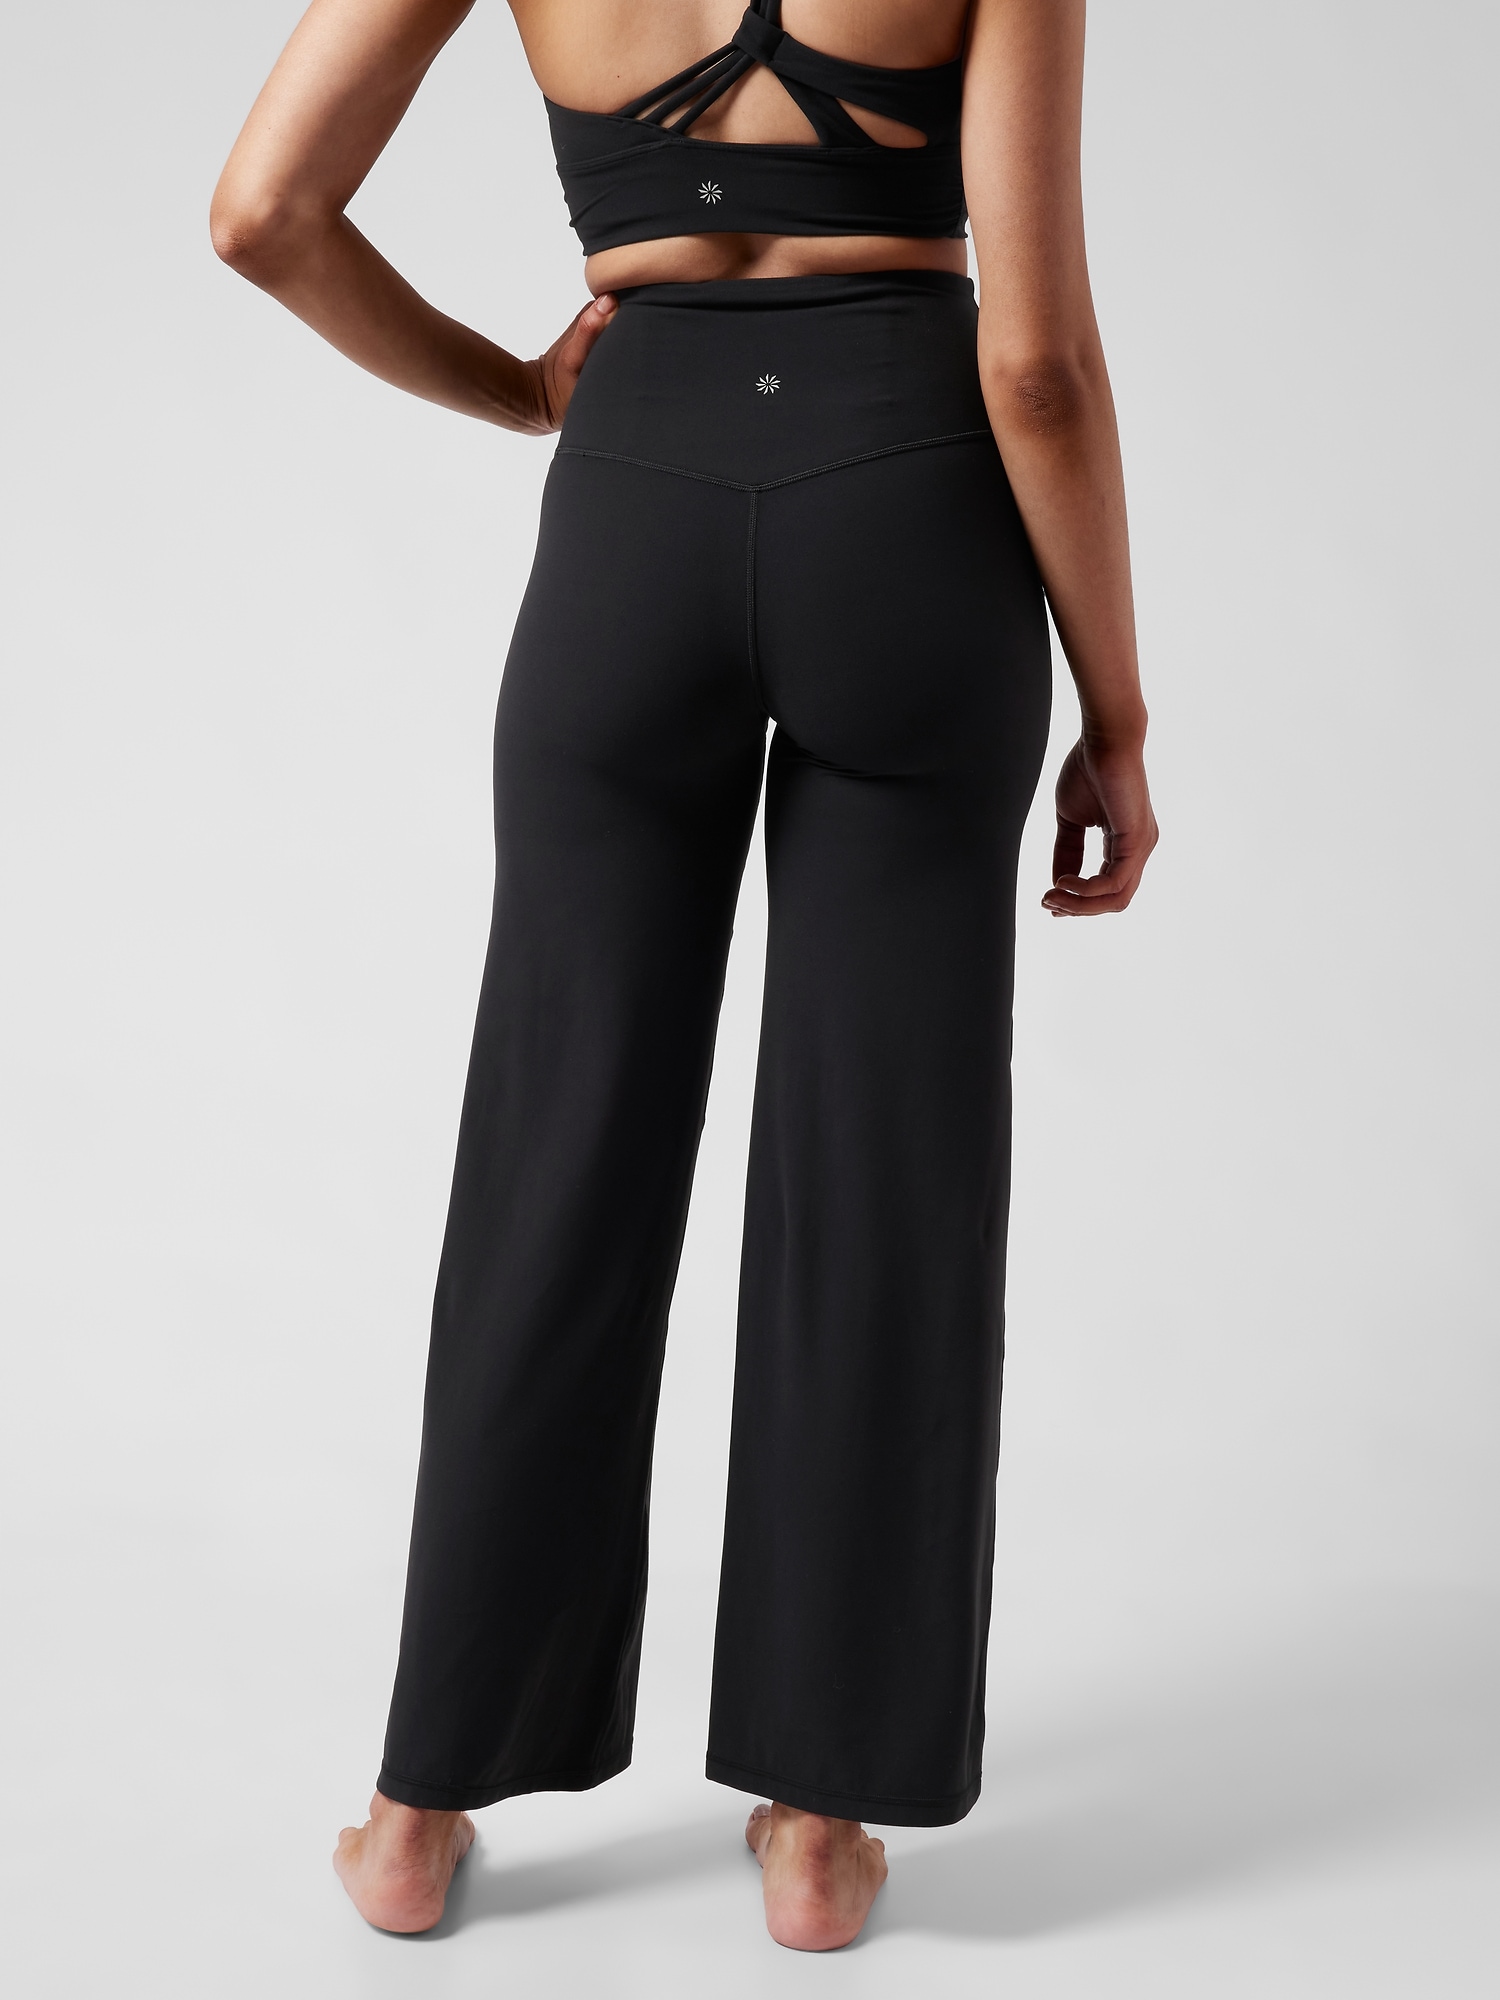 Athleta MT M TALL Delancey Flare Pant Black Fitted Flared Pants, Travel  Work NWT